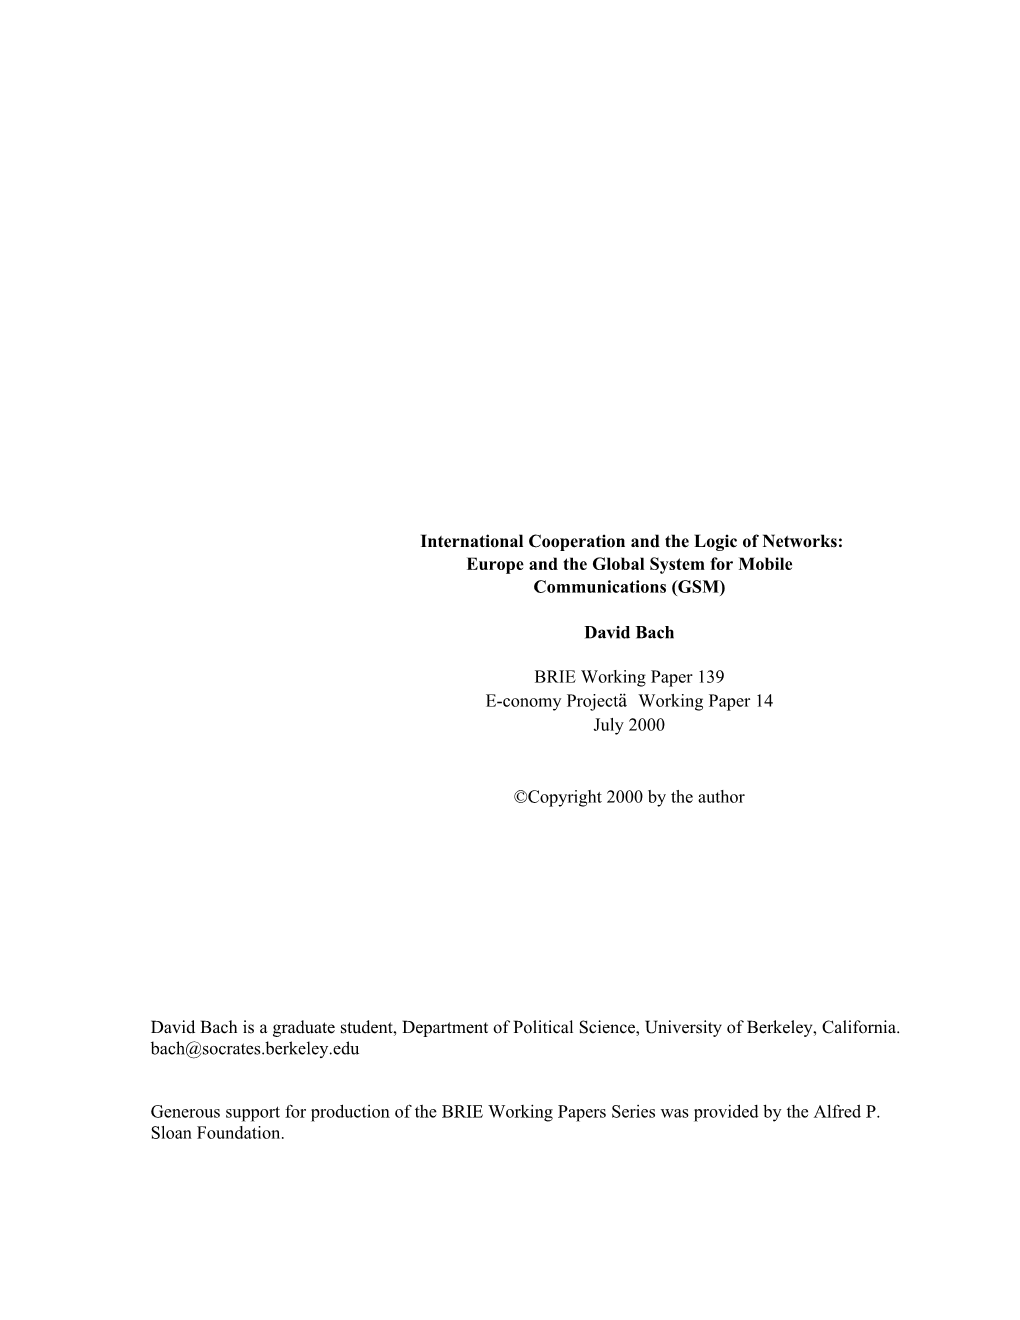 International Cooperation and the Logic of Networks: Europe and the Global System for Mobile Communications (GSM)